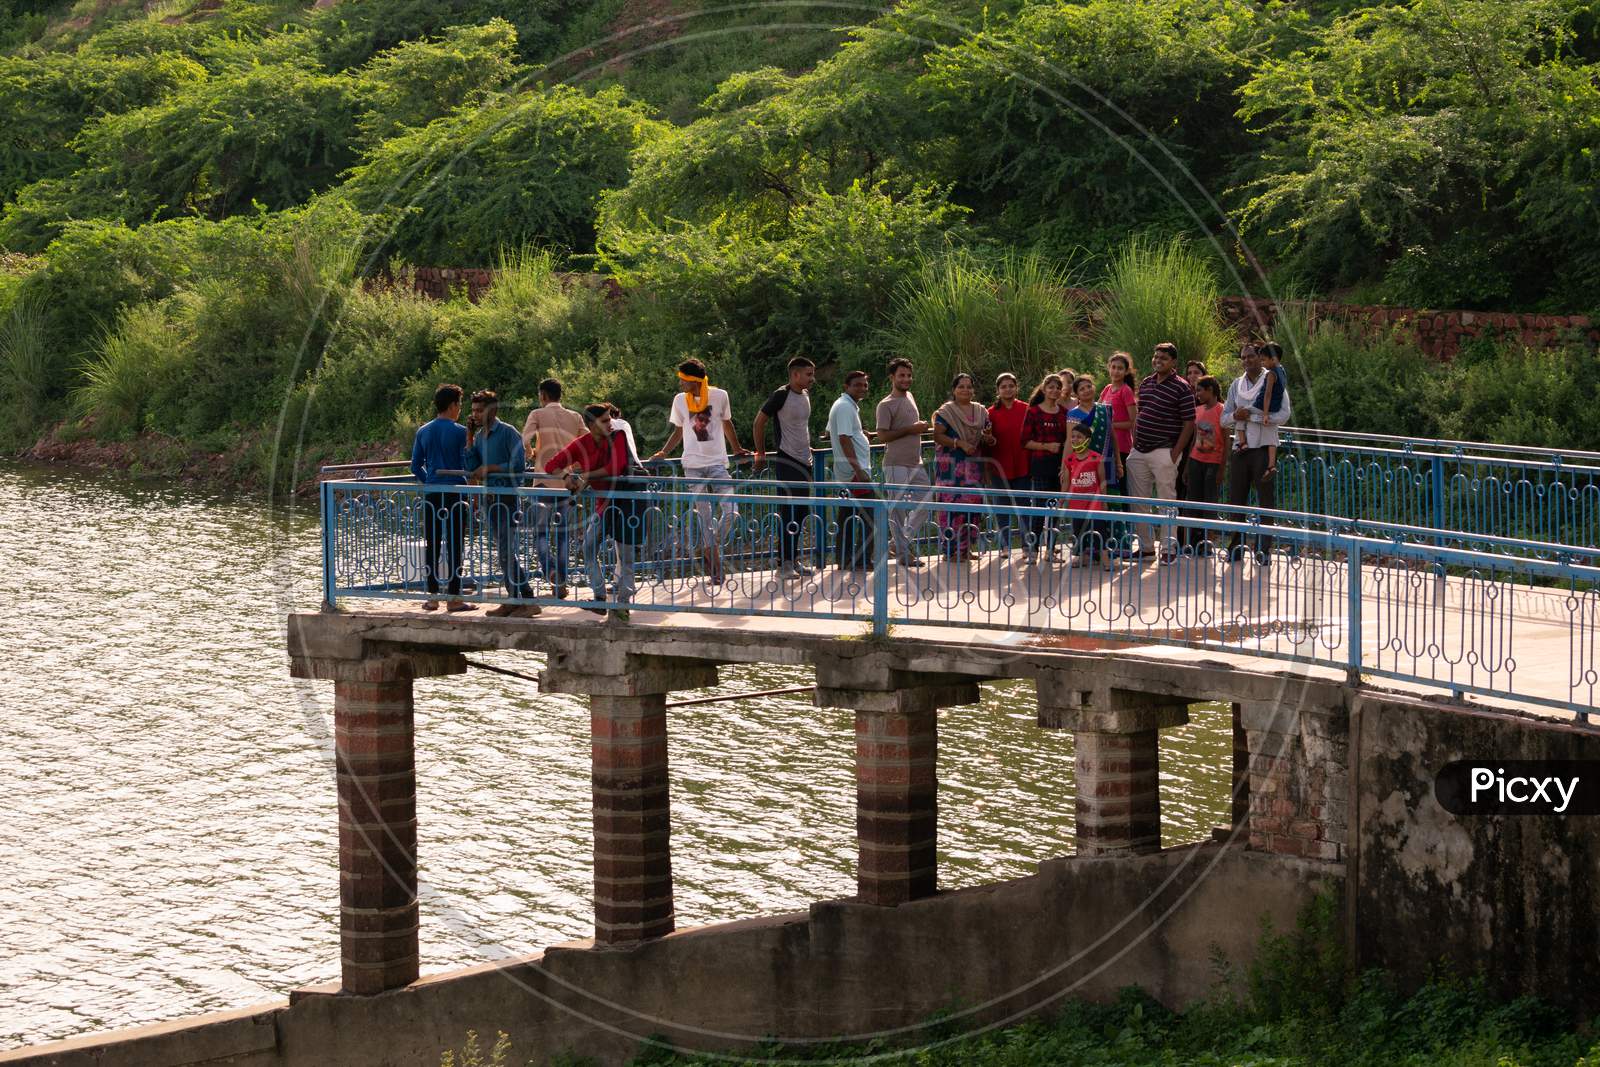 People visiting band baretha dam situated in Bayana Tehsil in Bharatpur district of Rajasthan during monsoon season